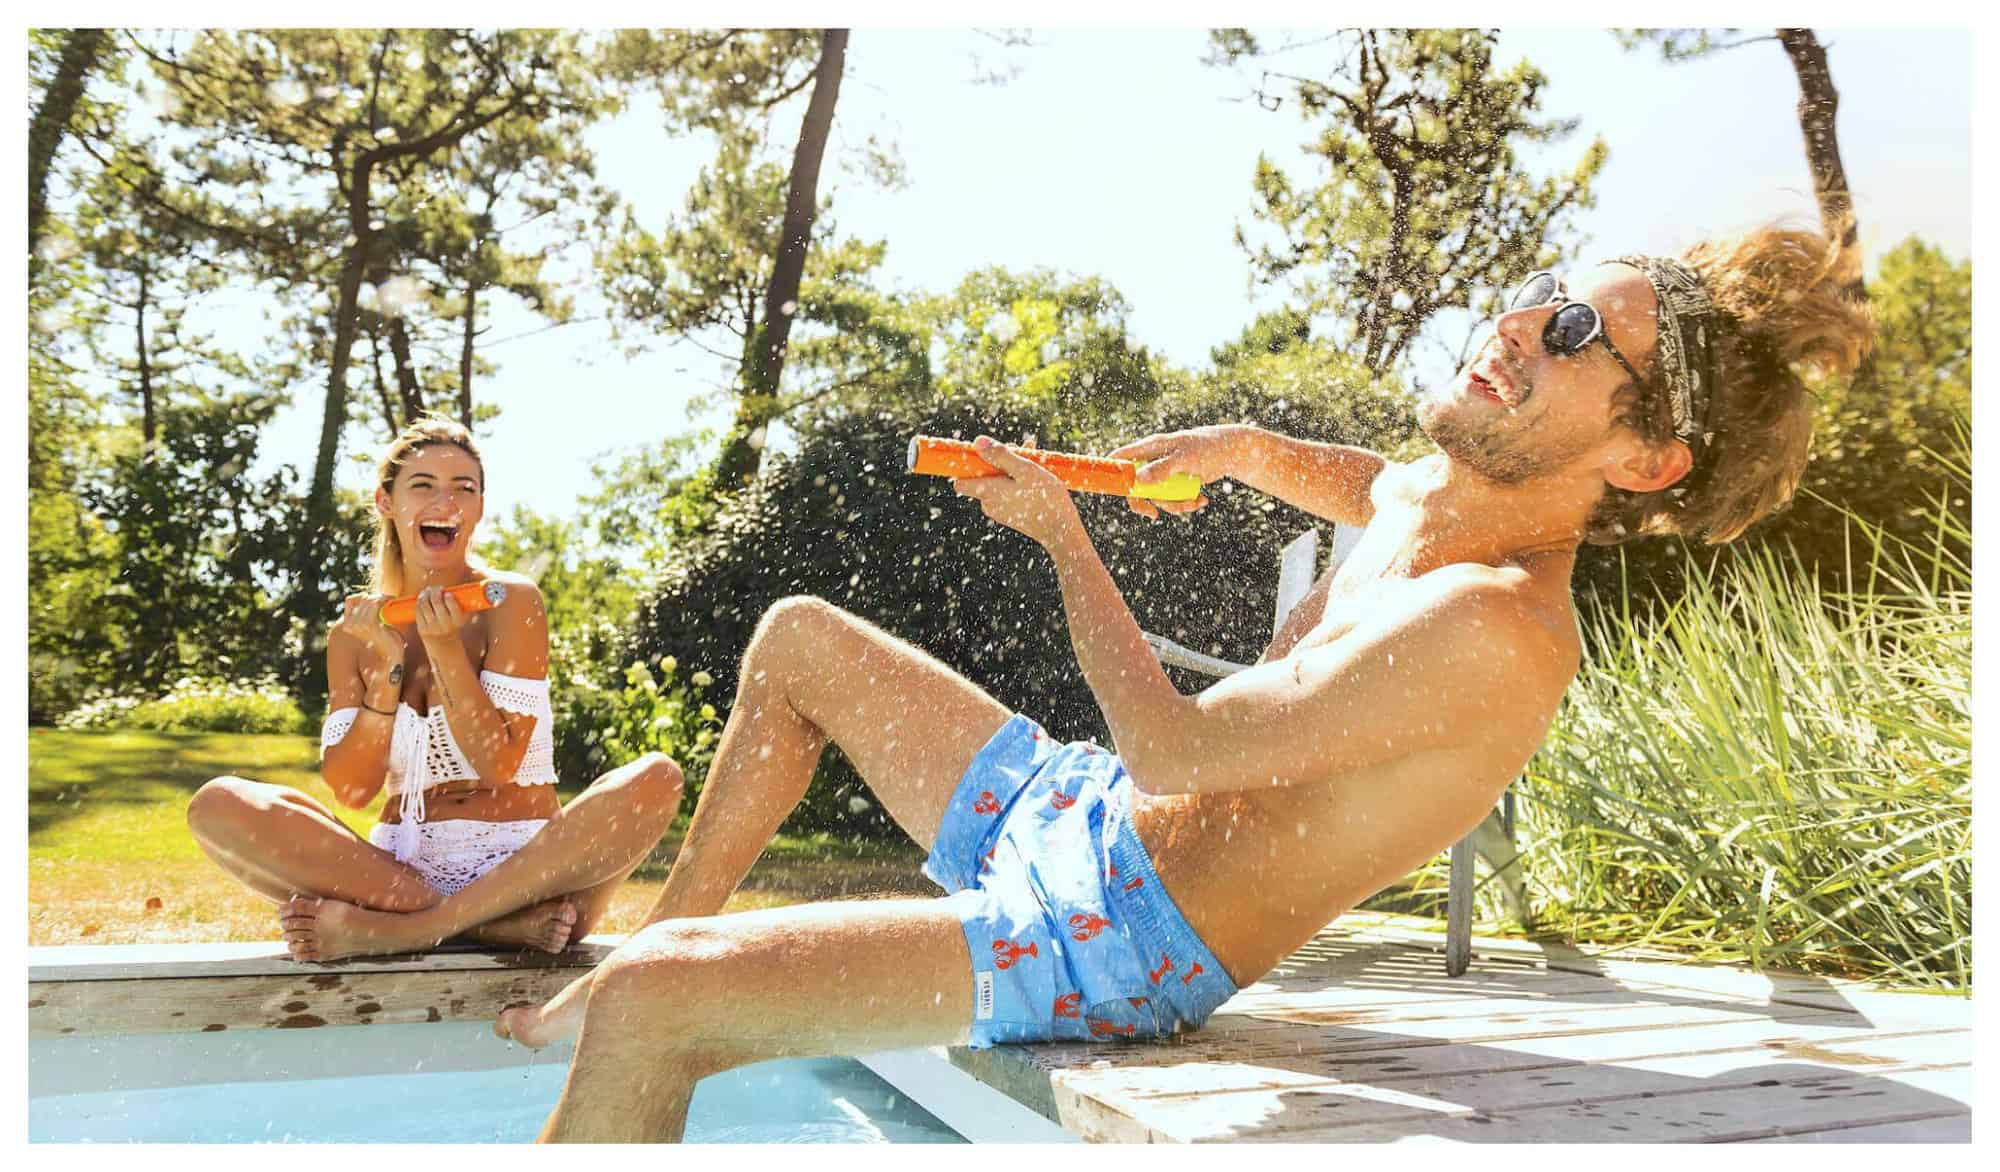 A man and a woman by a pool are having fun splashing water to each other with orange water guns.